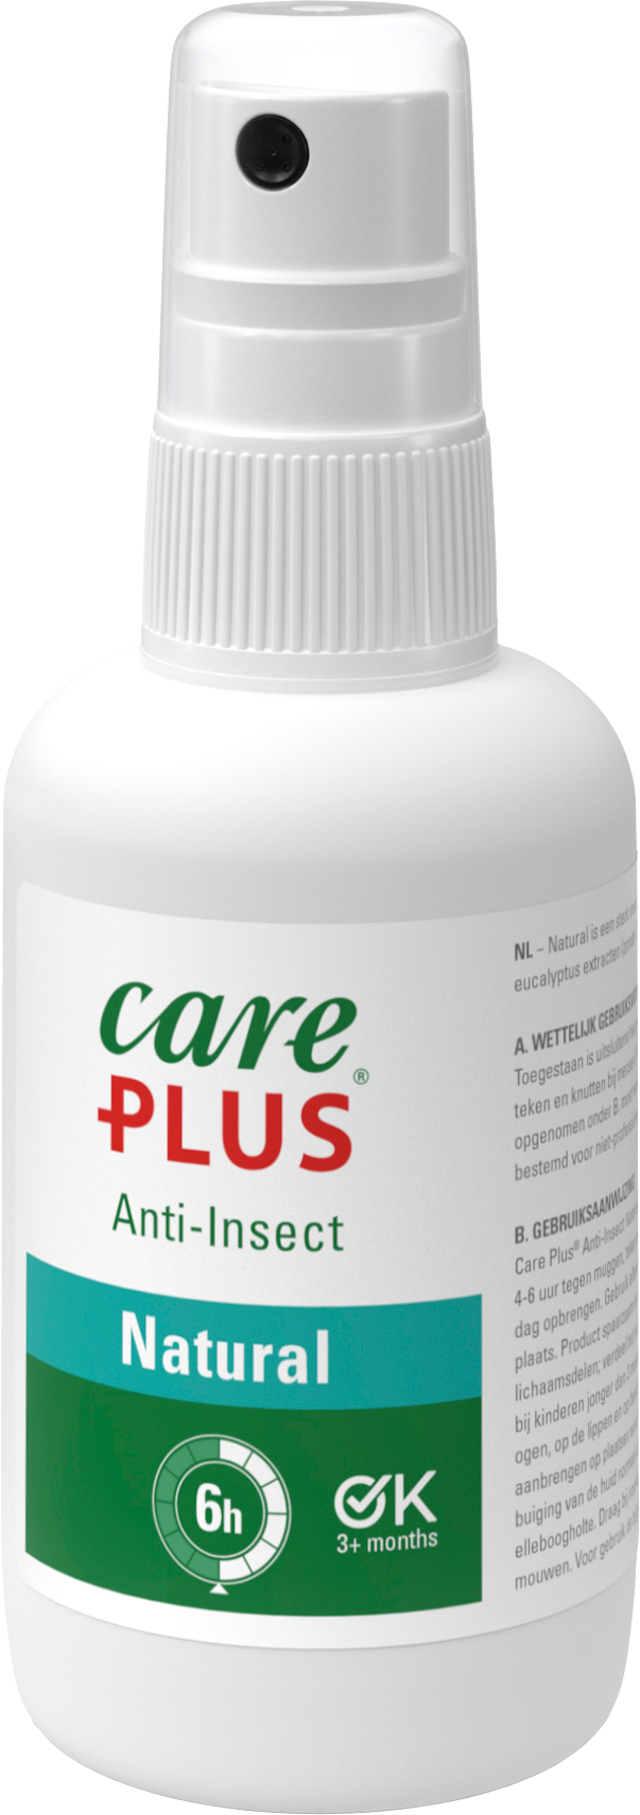 Care Plus Anti Insect Natural Insektenspray Citriodiol 60 ml